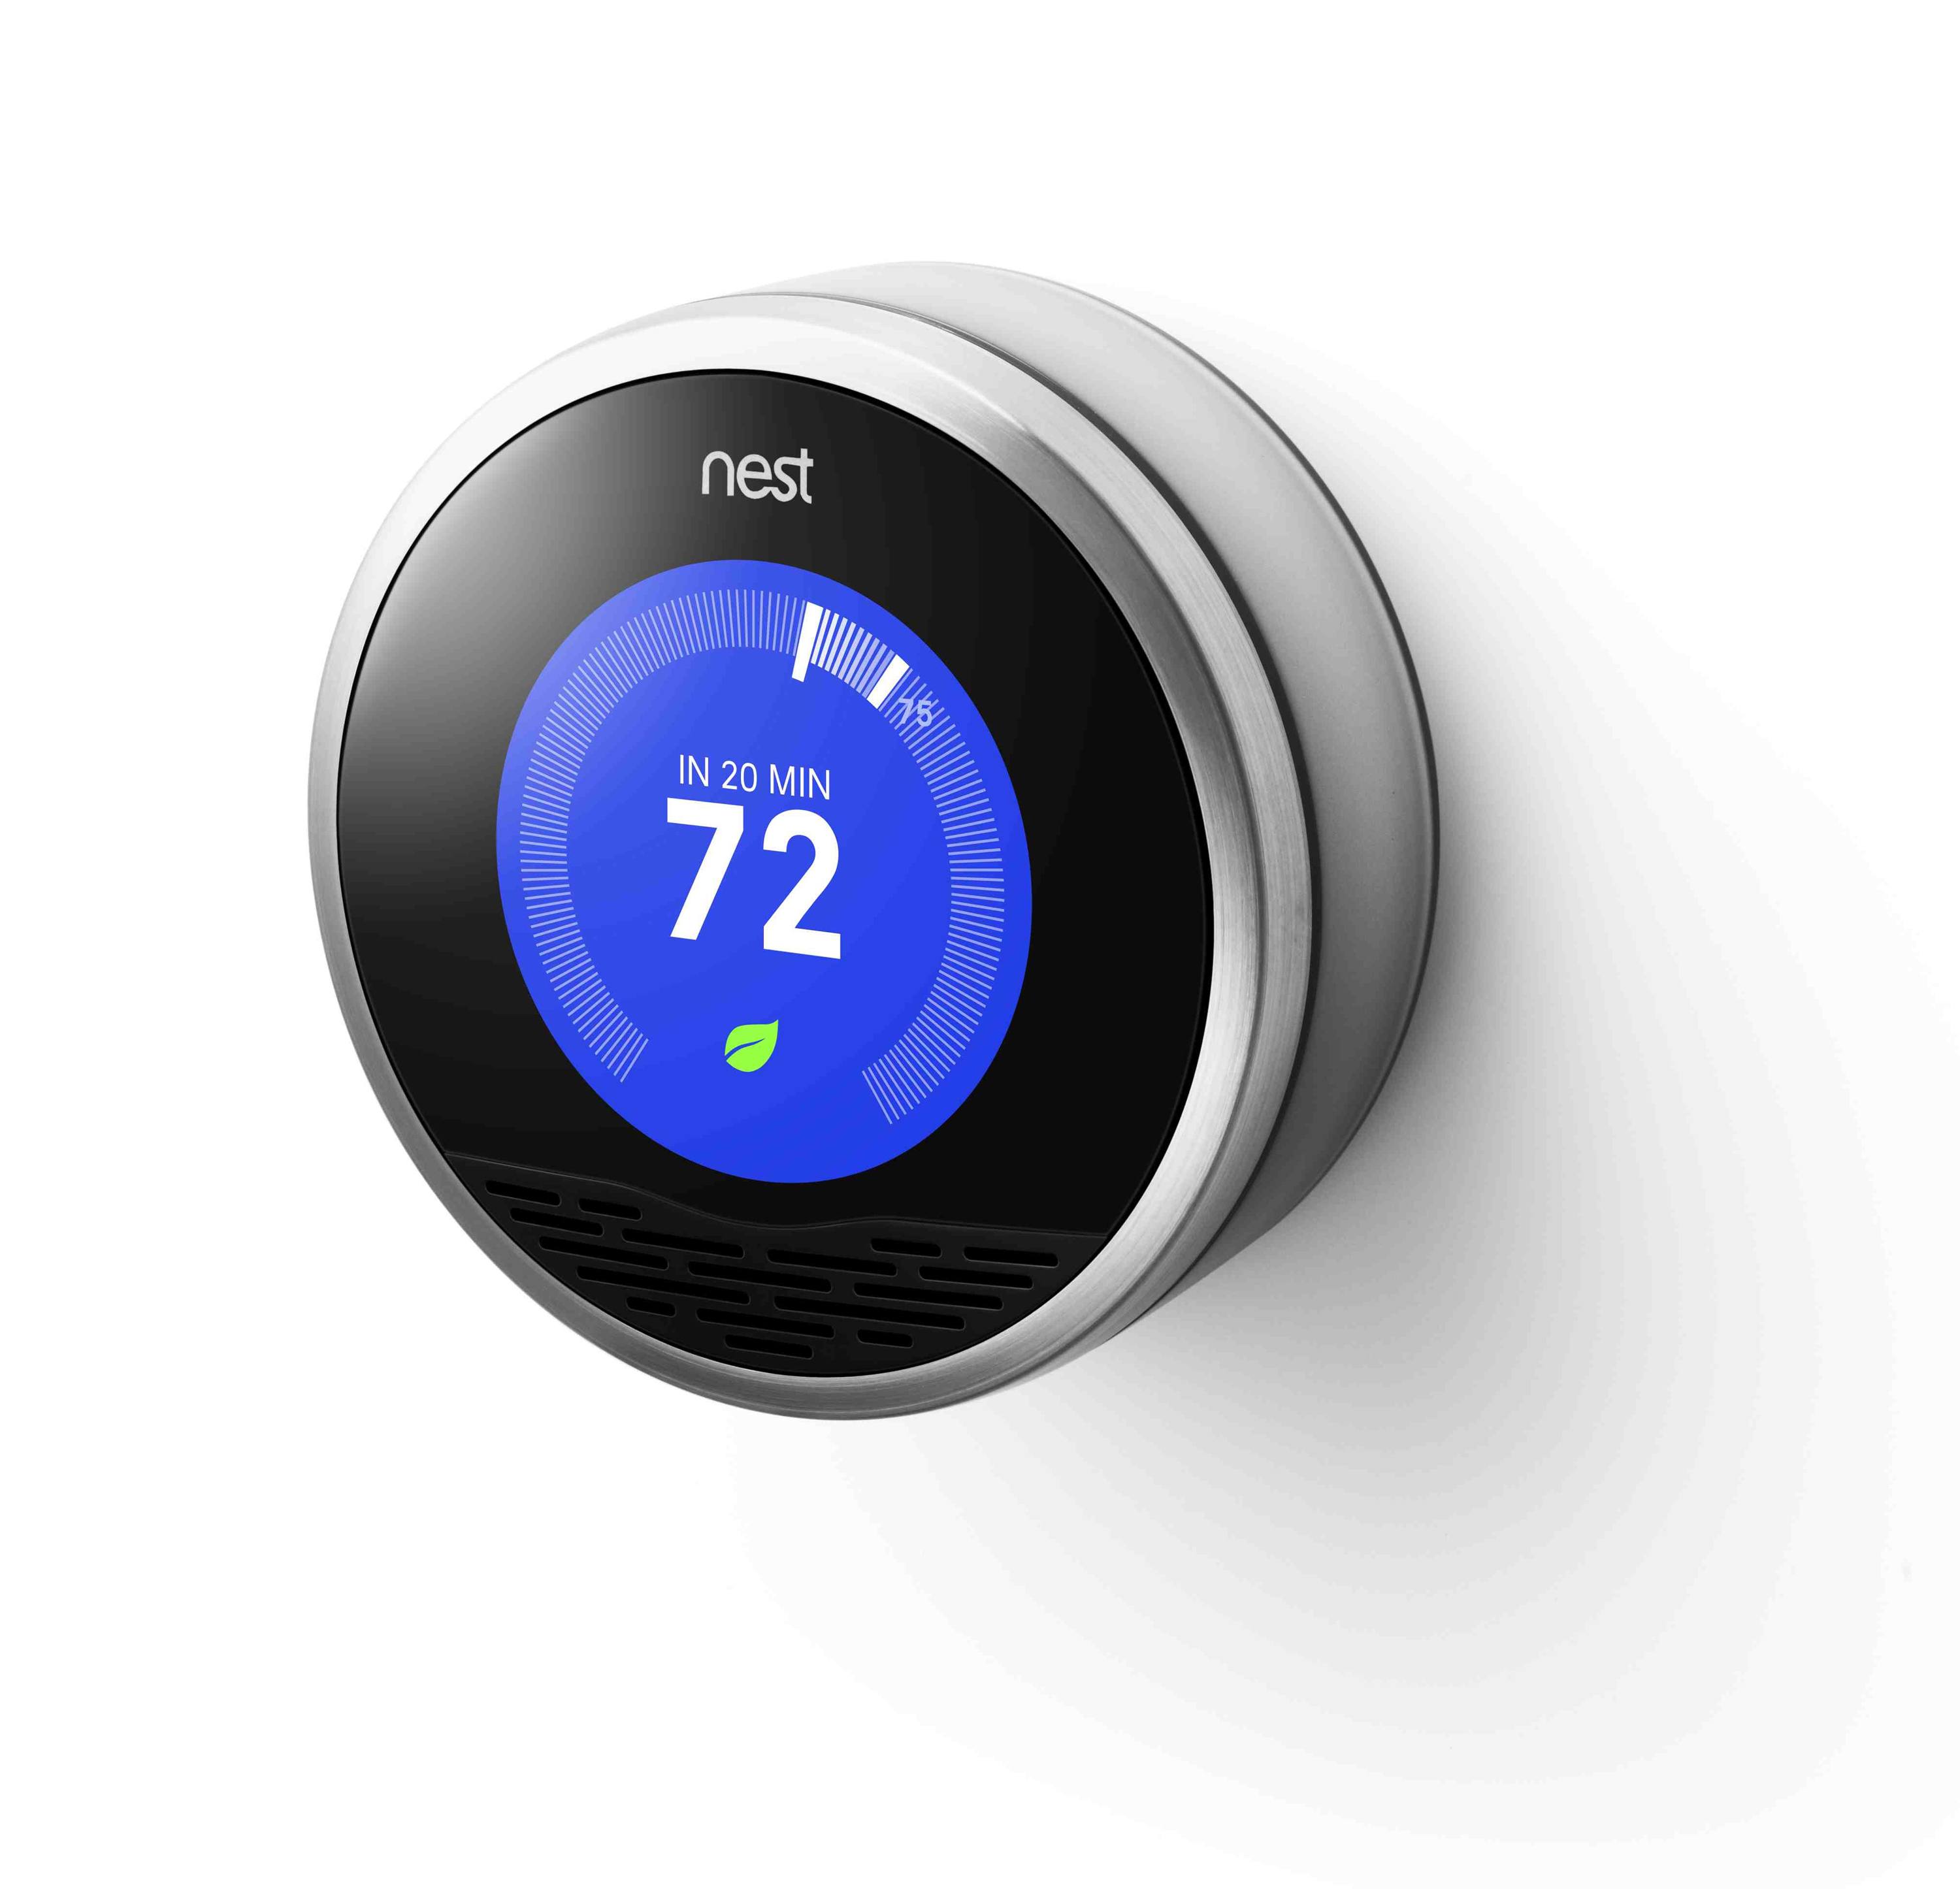 Created by the designer of the iPad, the Nest Thermostat is back-ordered until early 2012.